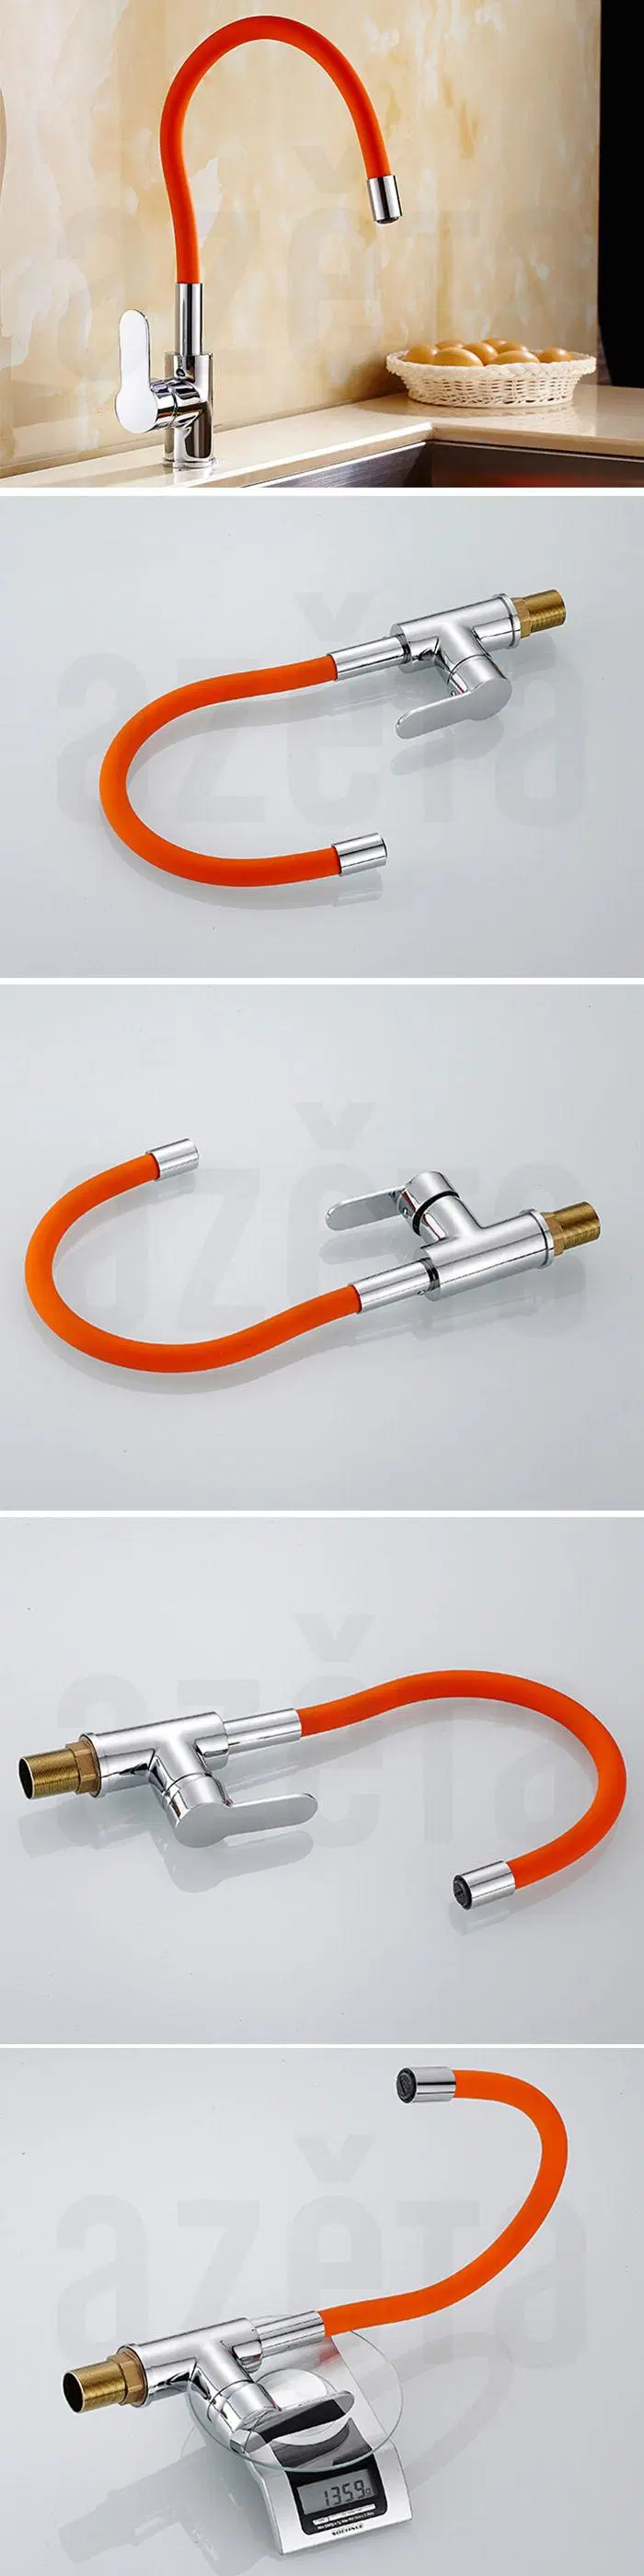 Single Handle Silicone Flexible Hose Brass Kitchen Sink Water Mixer Tap